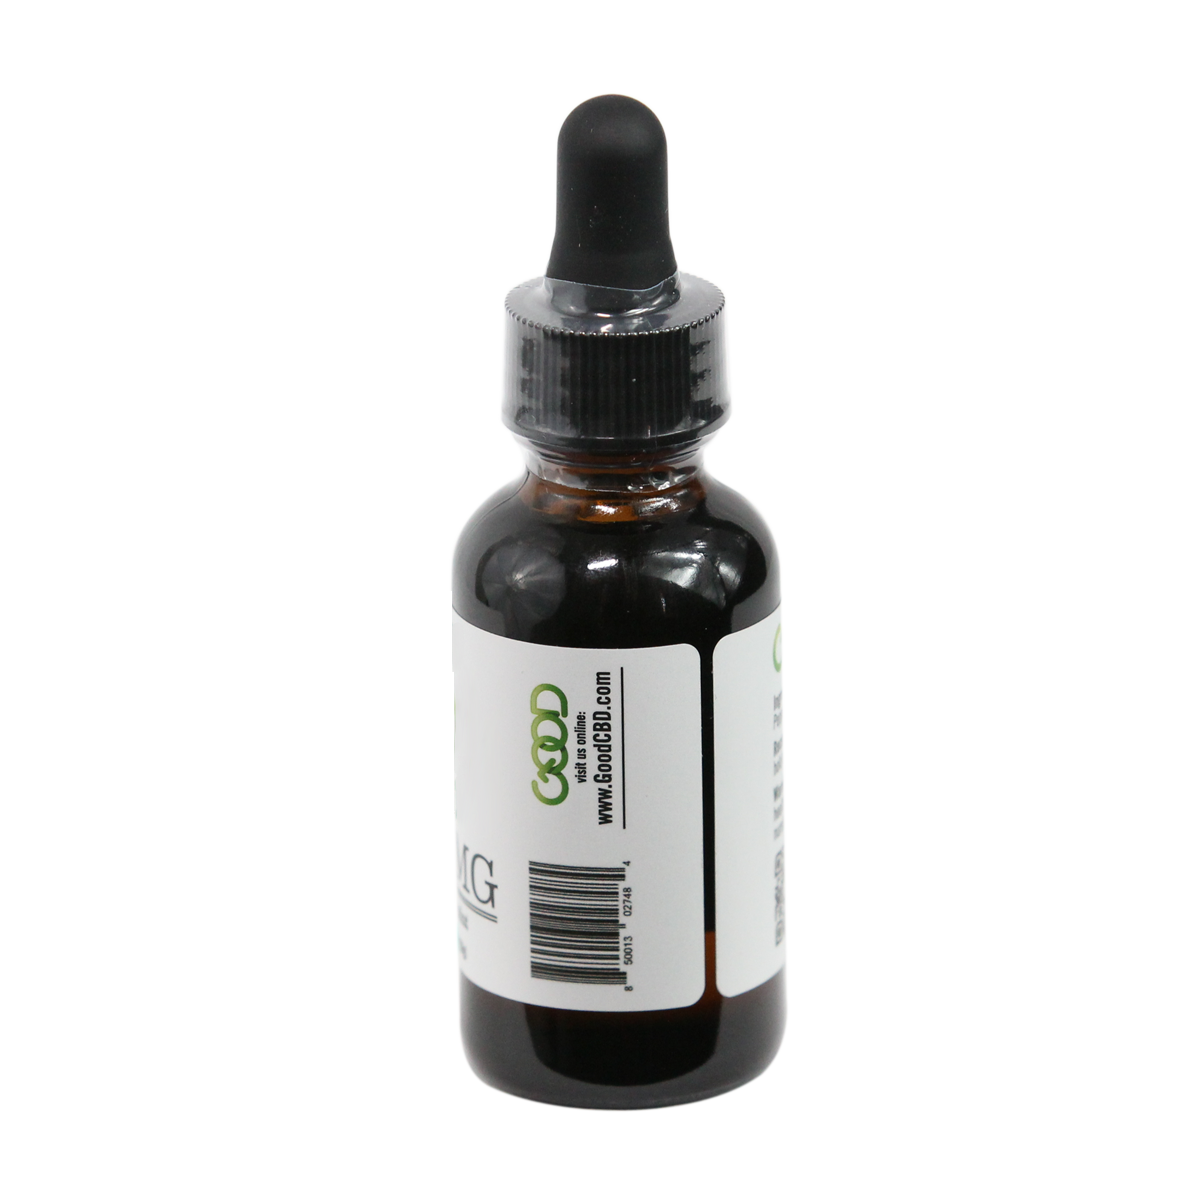 Full Spectrum Peppermint CBD Oils are available at GoodCBD.com.  We specialize in delta 8 carts, delta 8 gummies, delta 8 oil, and delta 8 flower.  Our website carries brands such as: 3CHI, Good CBD, Urb, Injoy Extracts, AiroPro, Delta Effex, and more.  Free shipping on orders $50.00 or more.